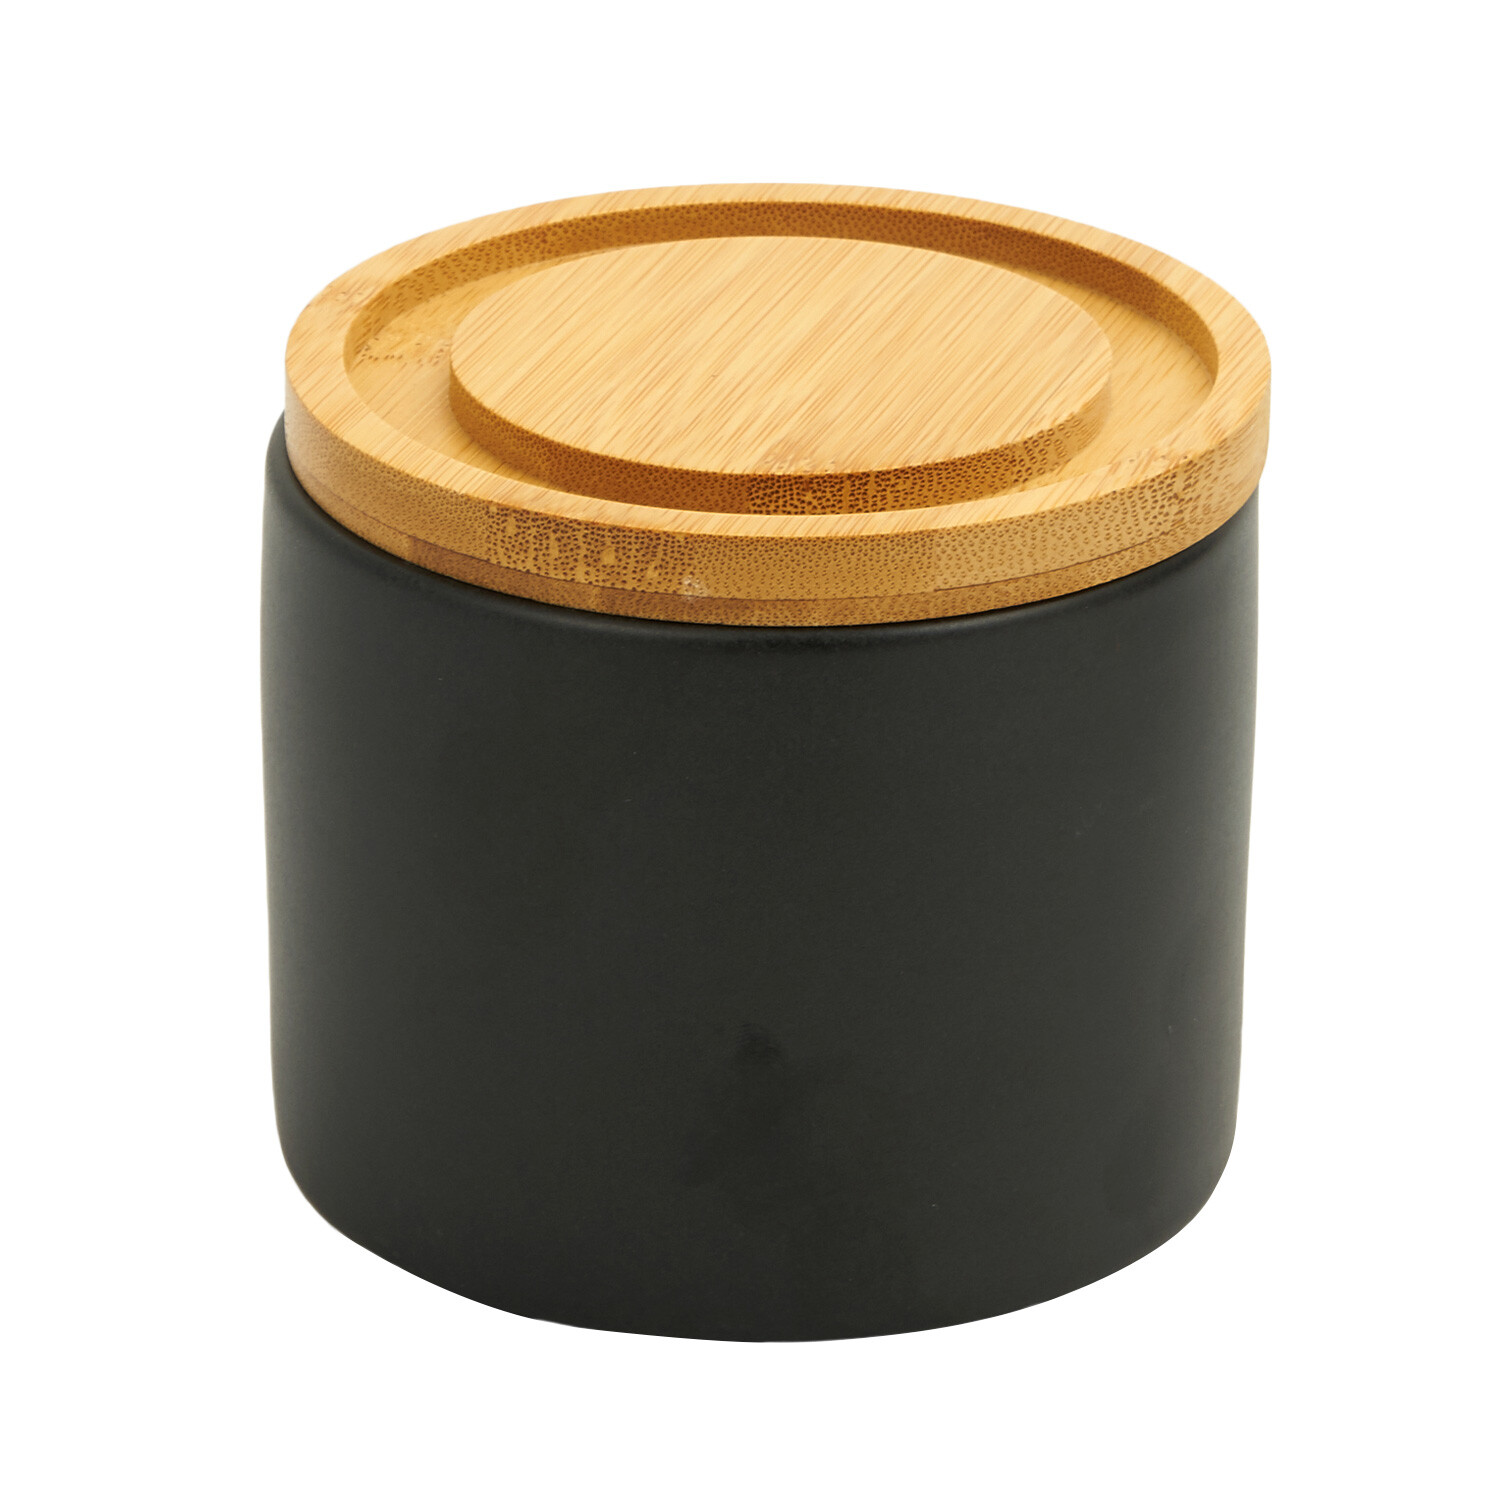 Malmo Stacking Canister - Black Image 2